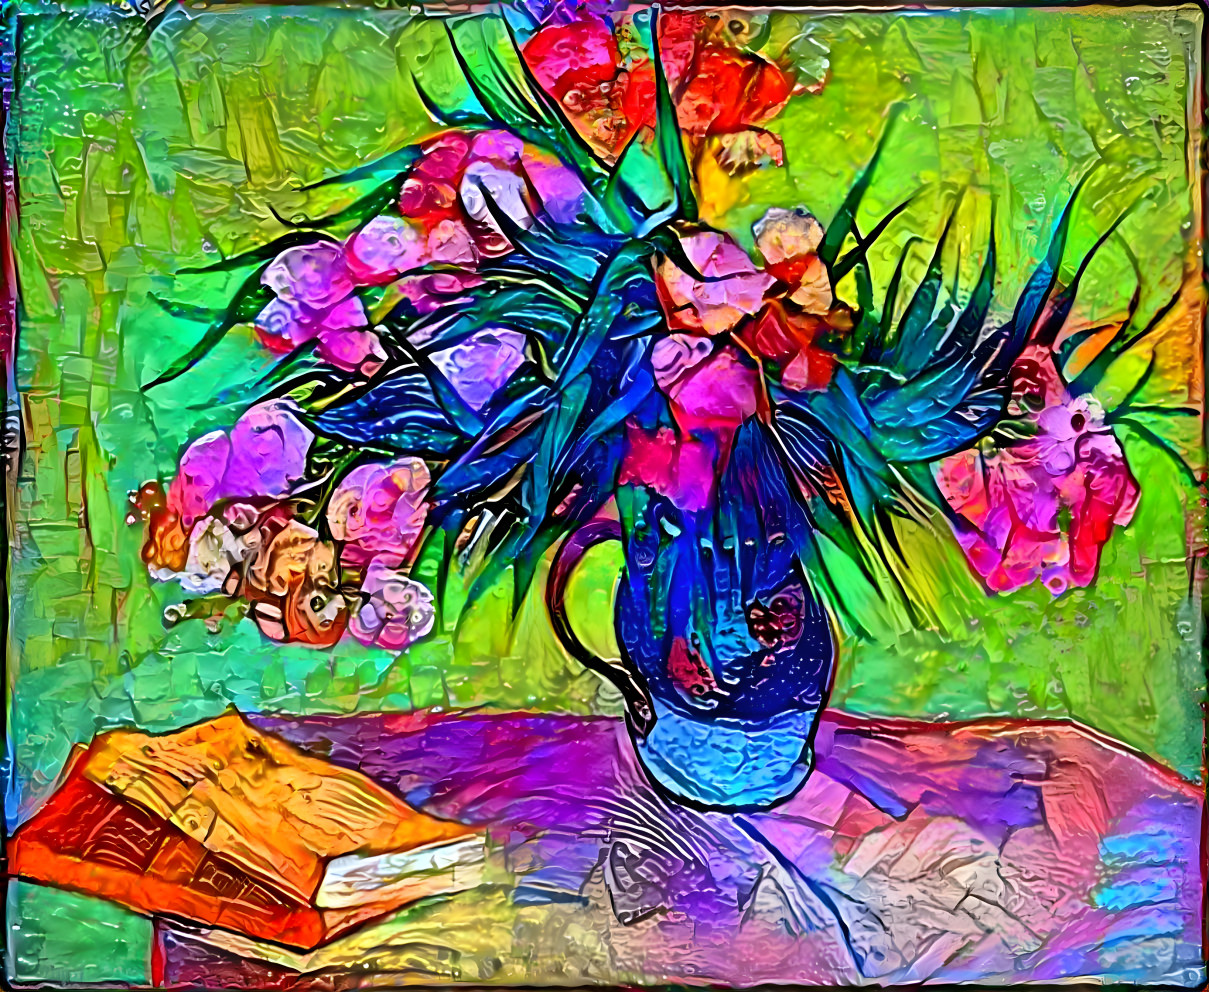 Vase of flowers on end table with books